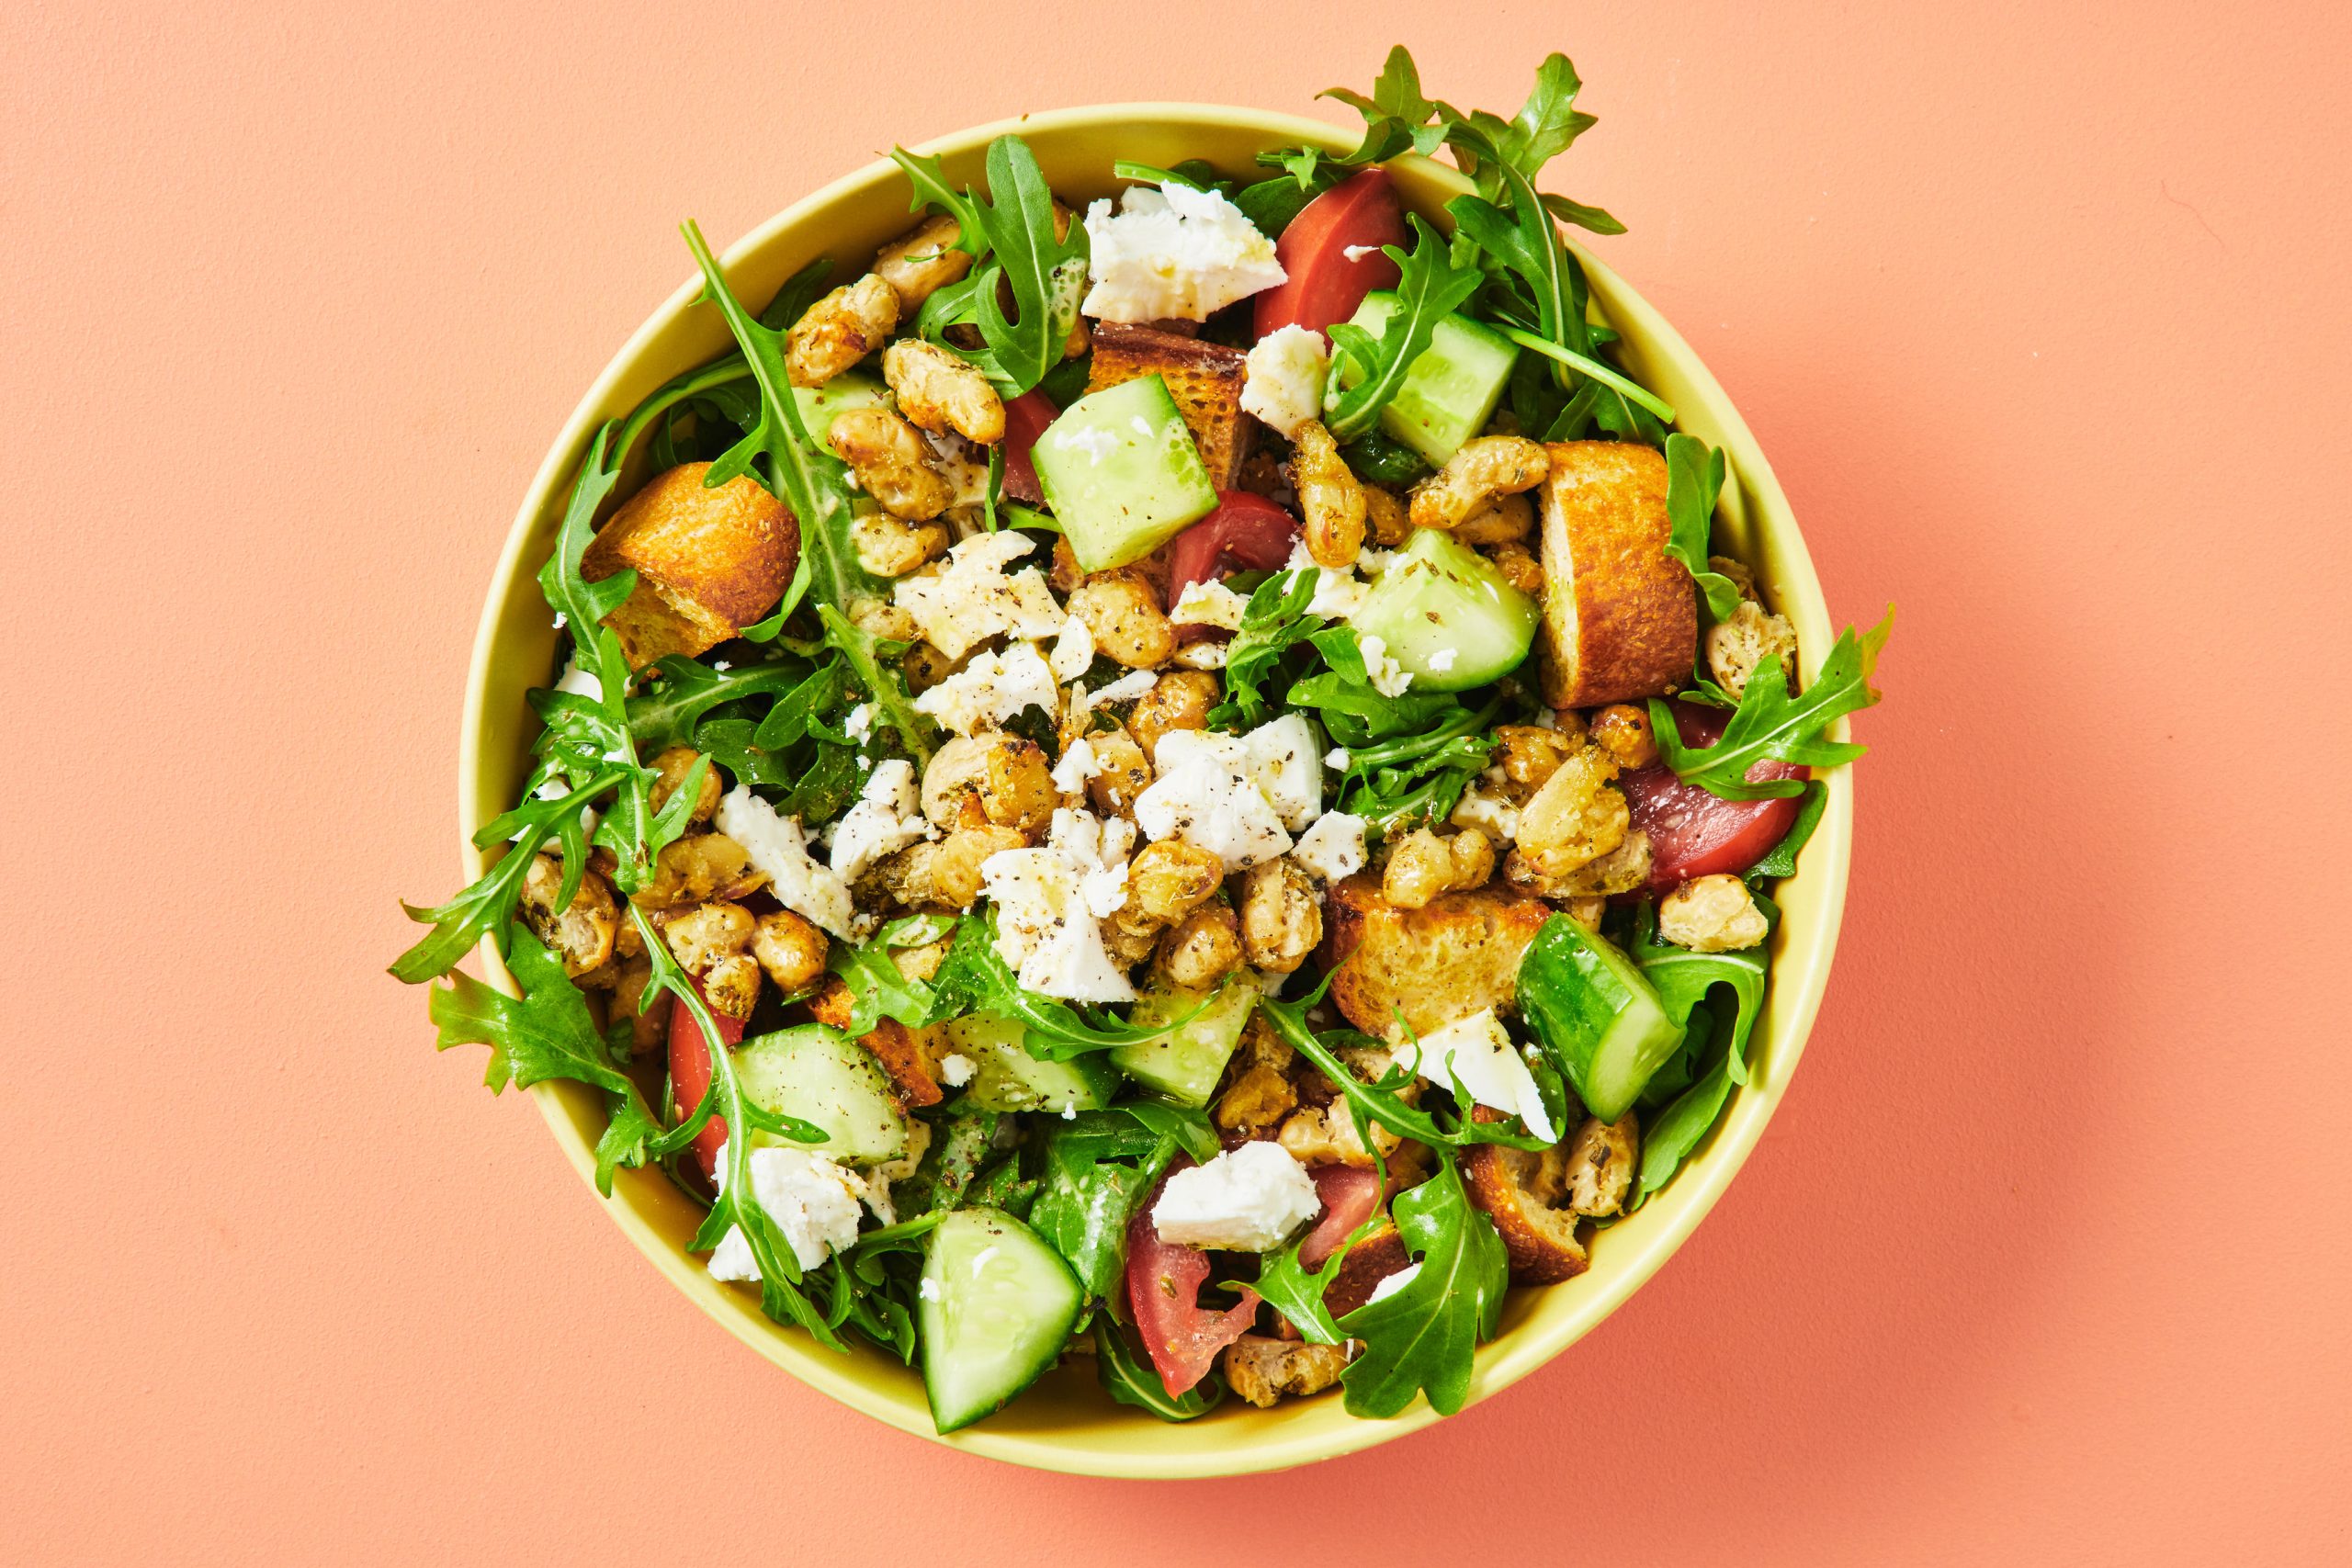 Low-Cal Vegan Greek Salad with 'Feta', White Beans and Croutons 